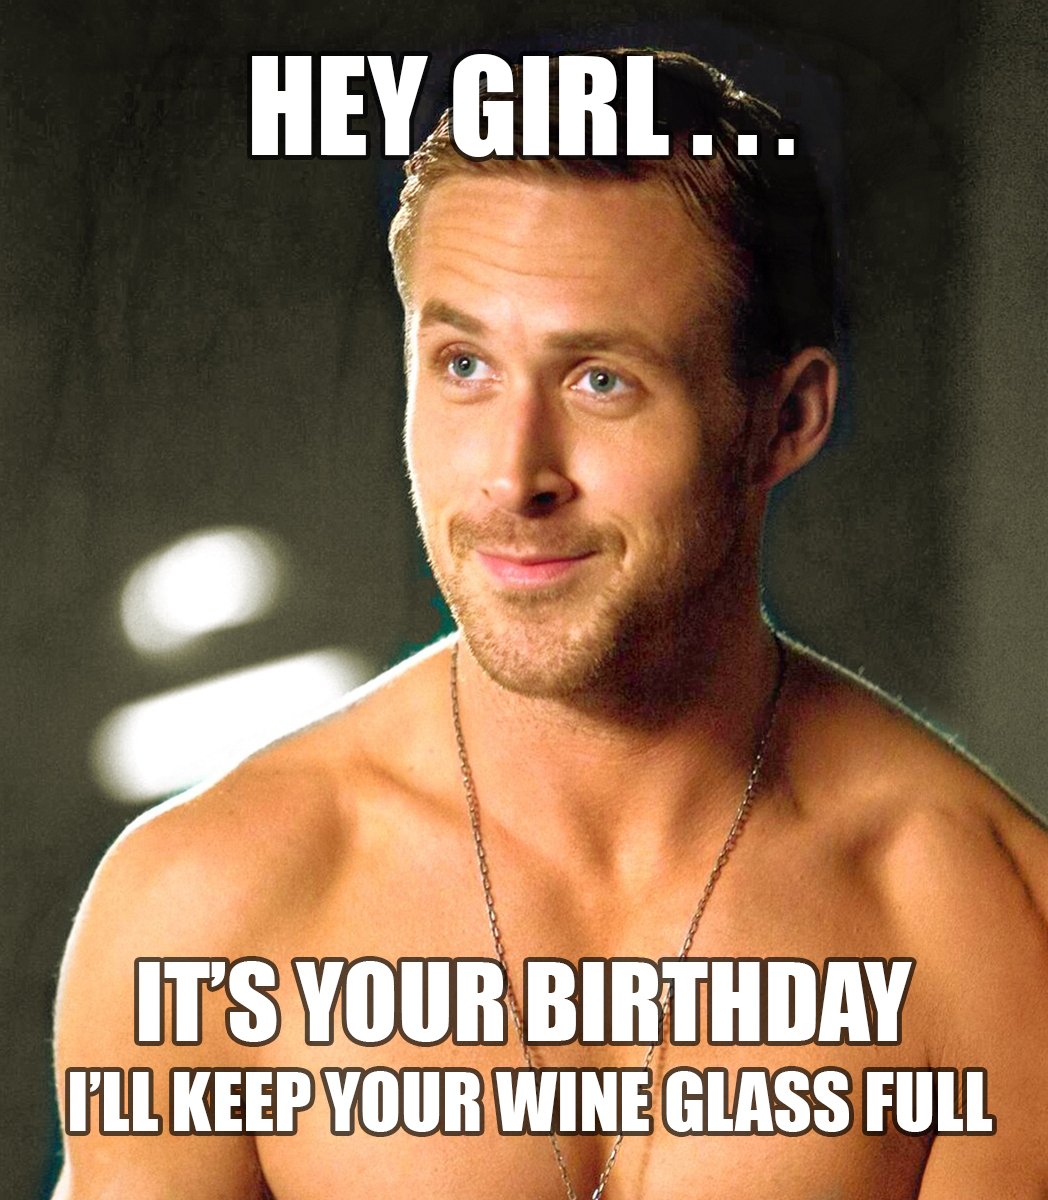 Funny wine label meme for a birthday bottle of wine that says: Hey girl...it's your birthday, I'll keep your wine glass full.